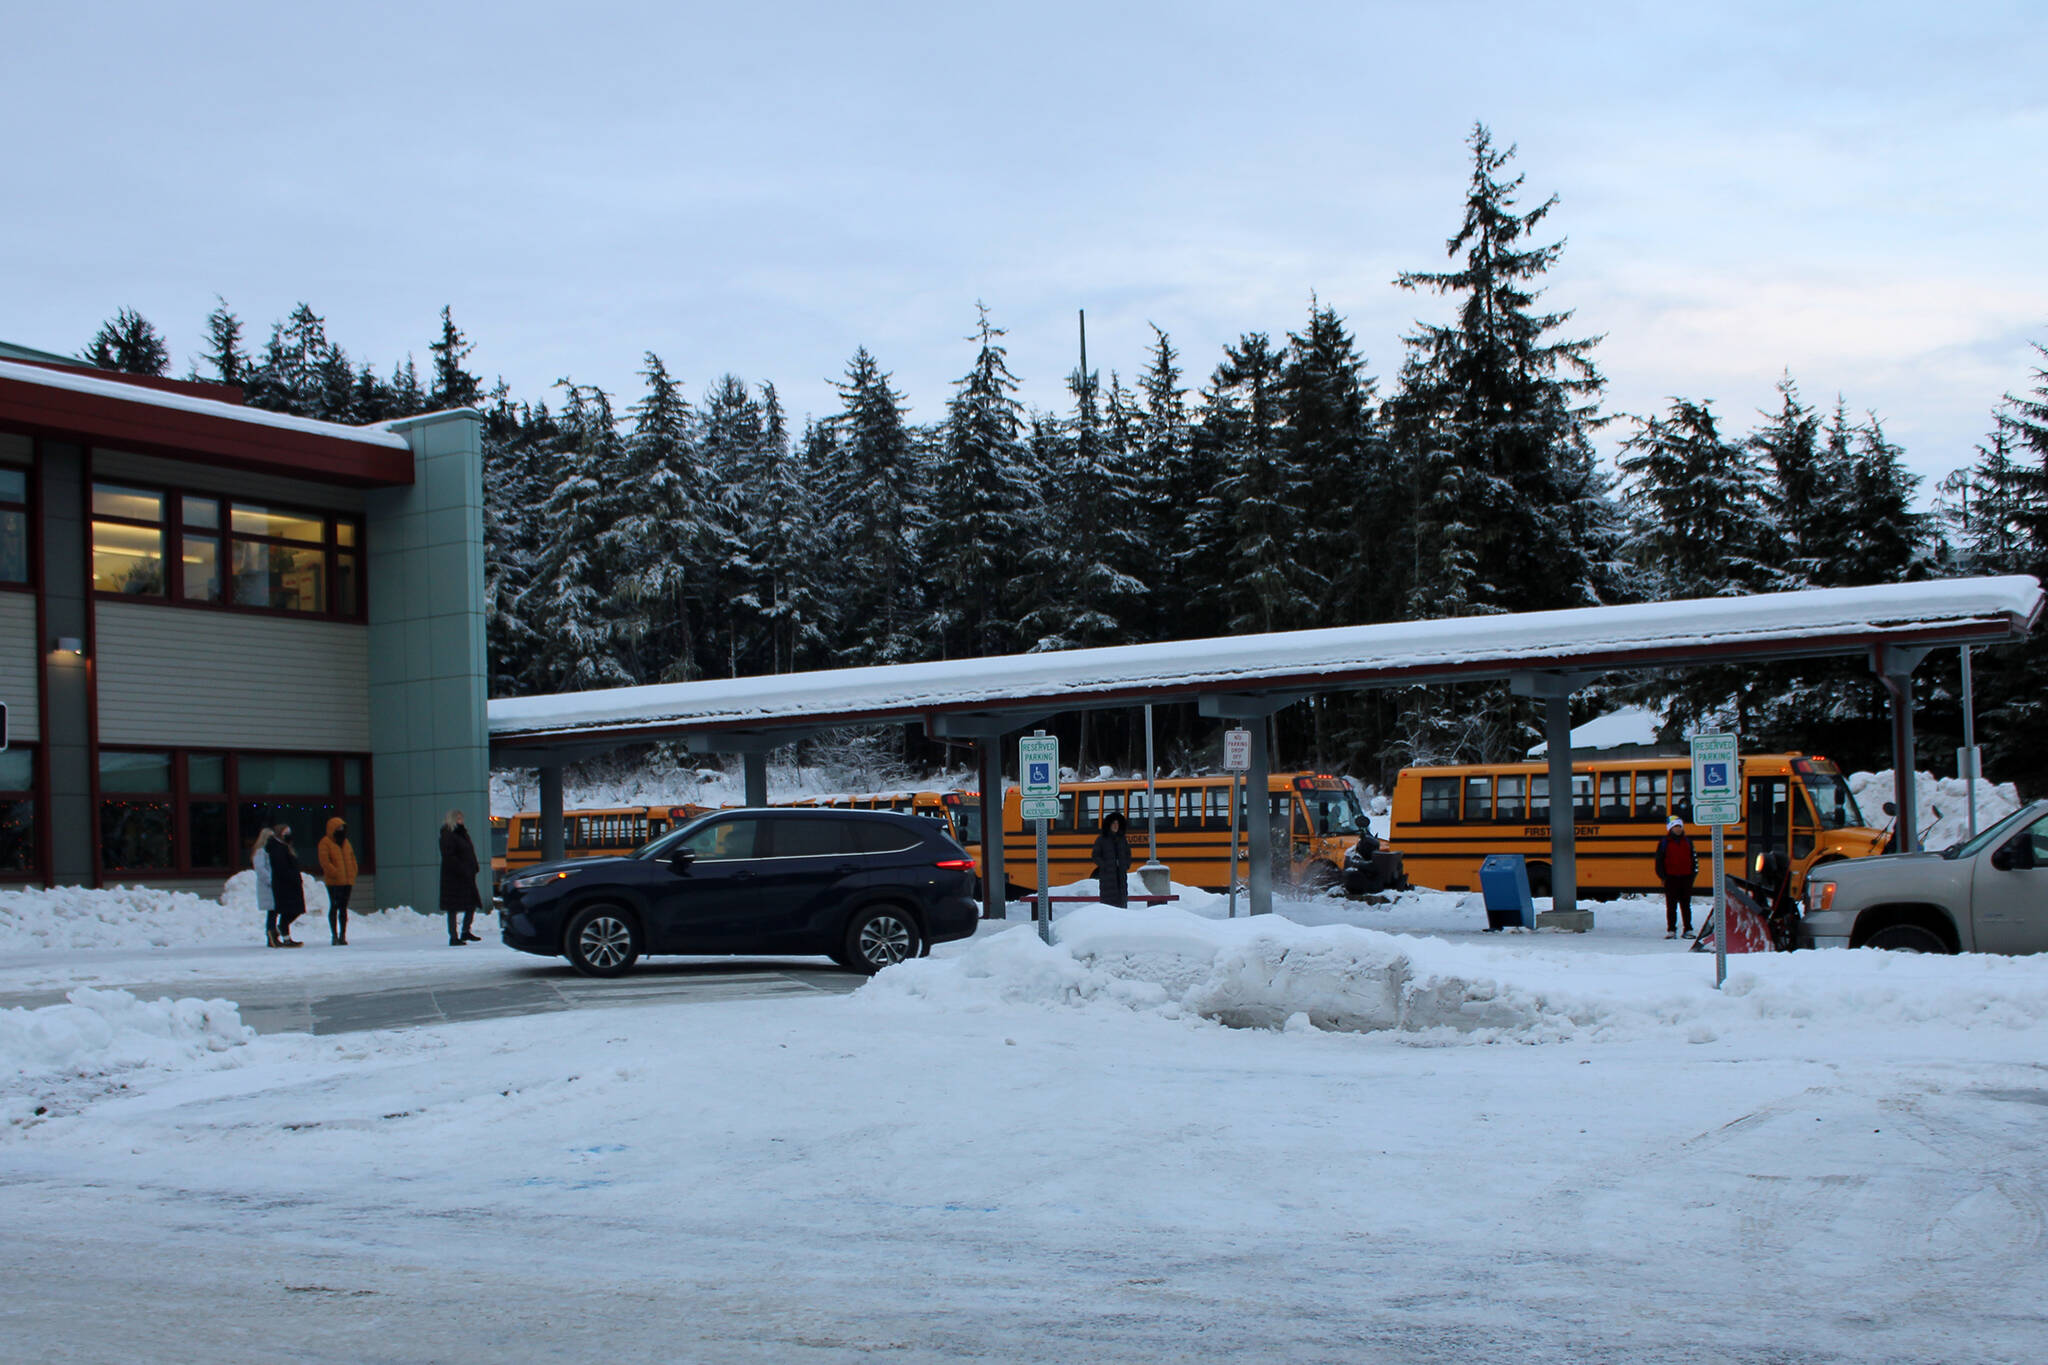 Dana Zigmund/Juneau Empire 
Buses leave Auke Bay Elementary School at the end of the school day on Dec. 16. Auke Bay is one of the school buildings that was renovated using the state’s school bond debt reimbursement program that allows municipalities to renovate eligible schools by reimbursing about 70% of the cost of the project if it is approved by a referendum. This type of debt funding was also used to renovate Sayéik: Gastineau Community School and Harborview elementary schools. In recent years, the state had not provided the full reimbursement amount. However, Gov. Mike Dunleavy proposed full funding for the program in the budget he unveiled Wednesday.